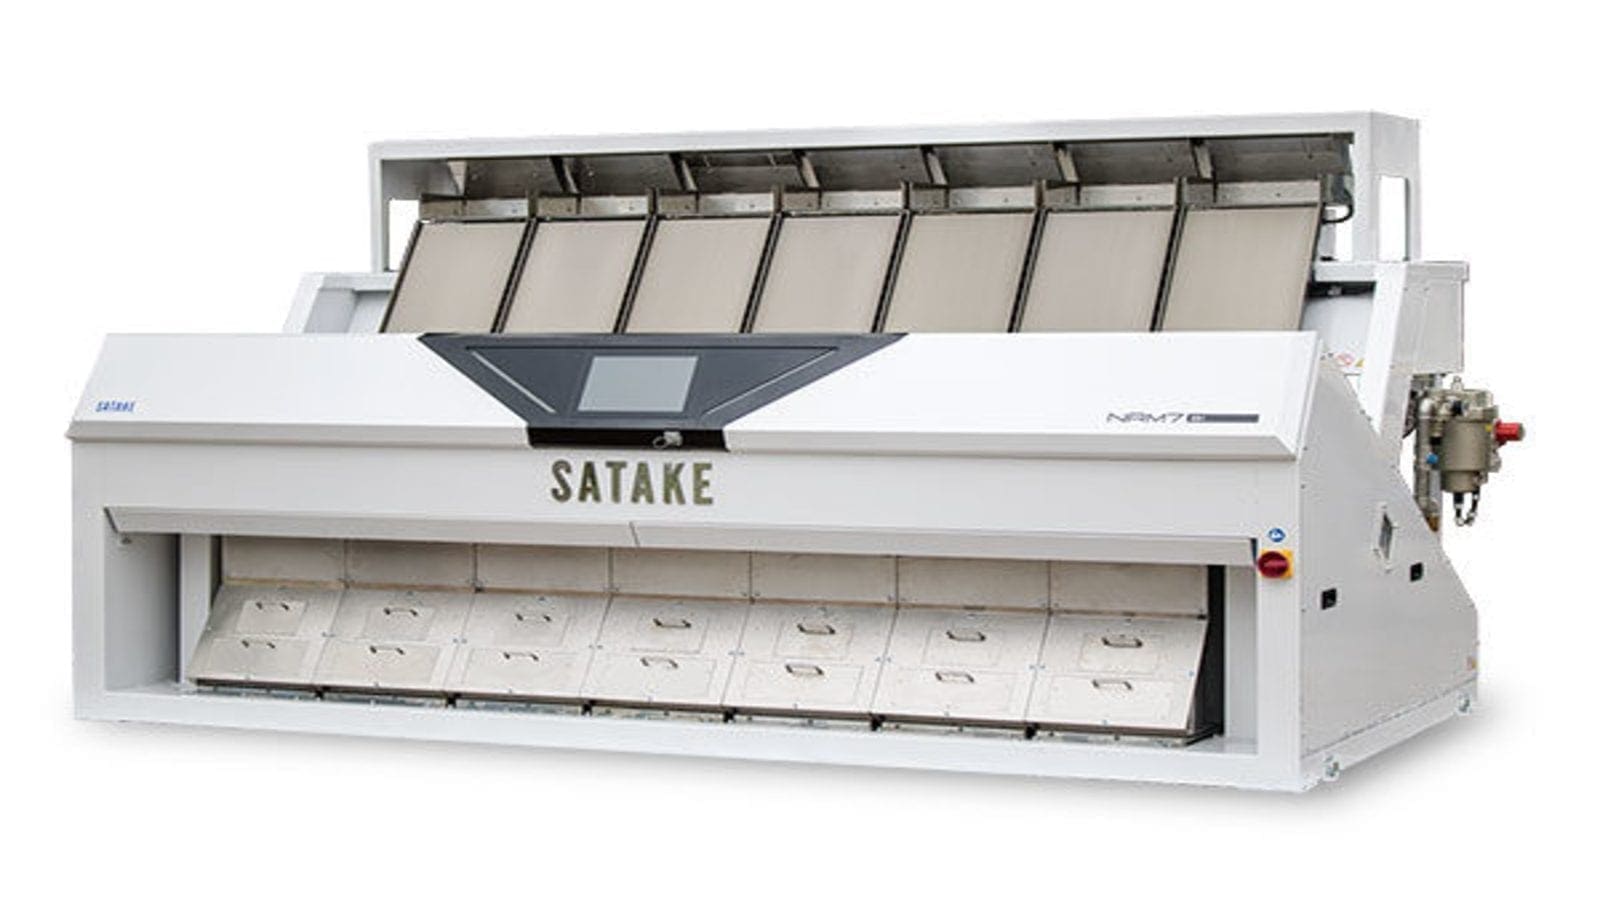 Satake drives efficiency in grain processing with launch of a new optical sorter